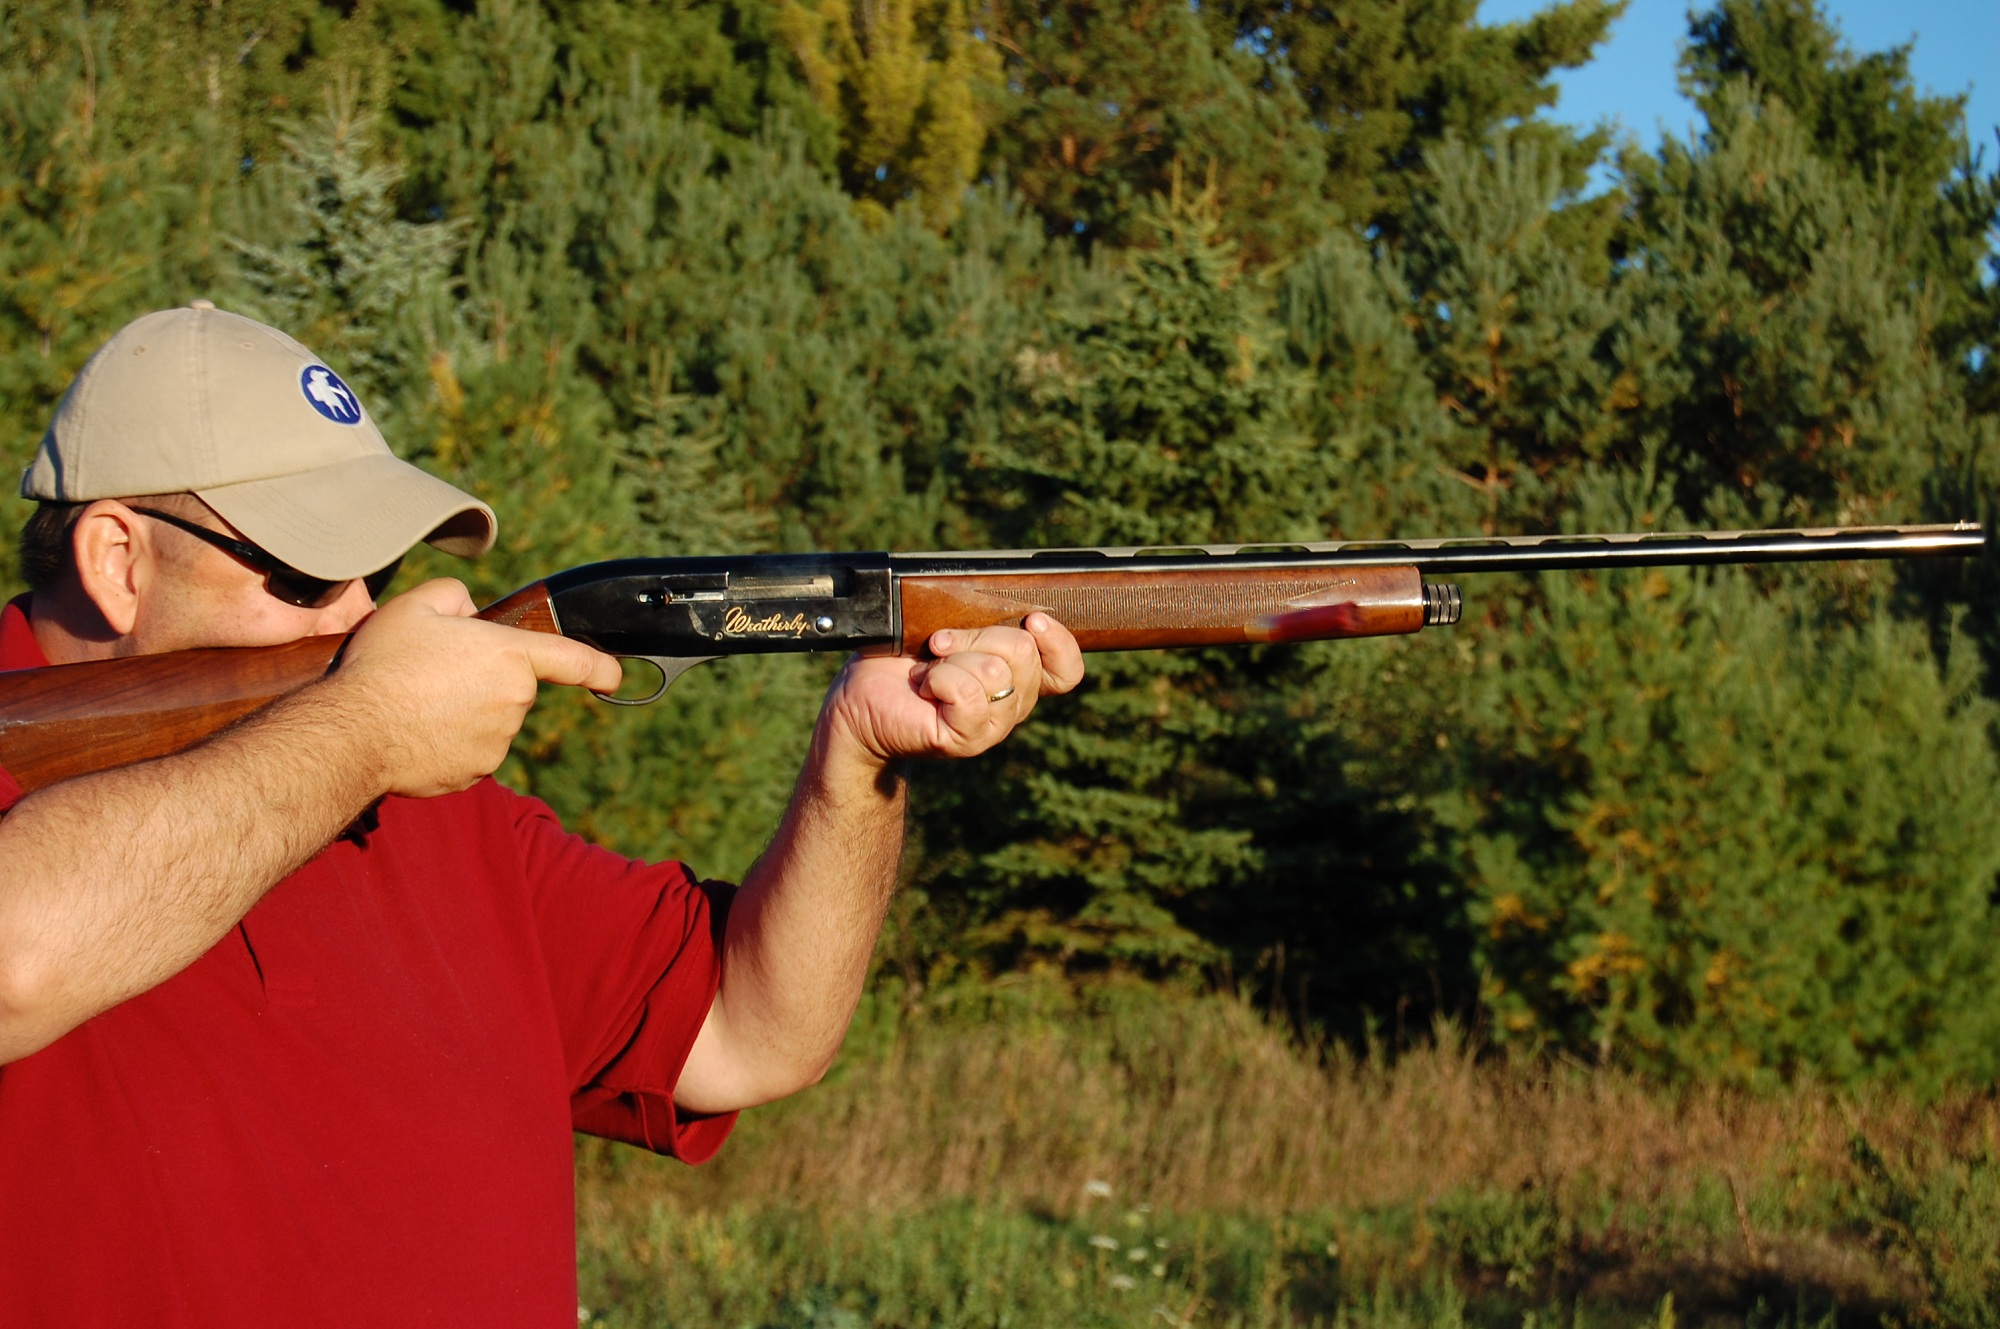 Review: Weatherby SA-08 Deluxe 28 Gauge Semiautomatic Shotgun - OutdoorHub